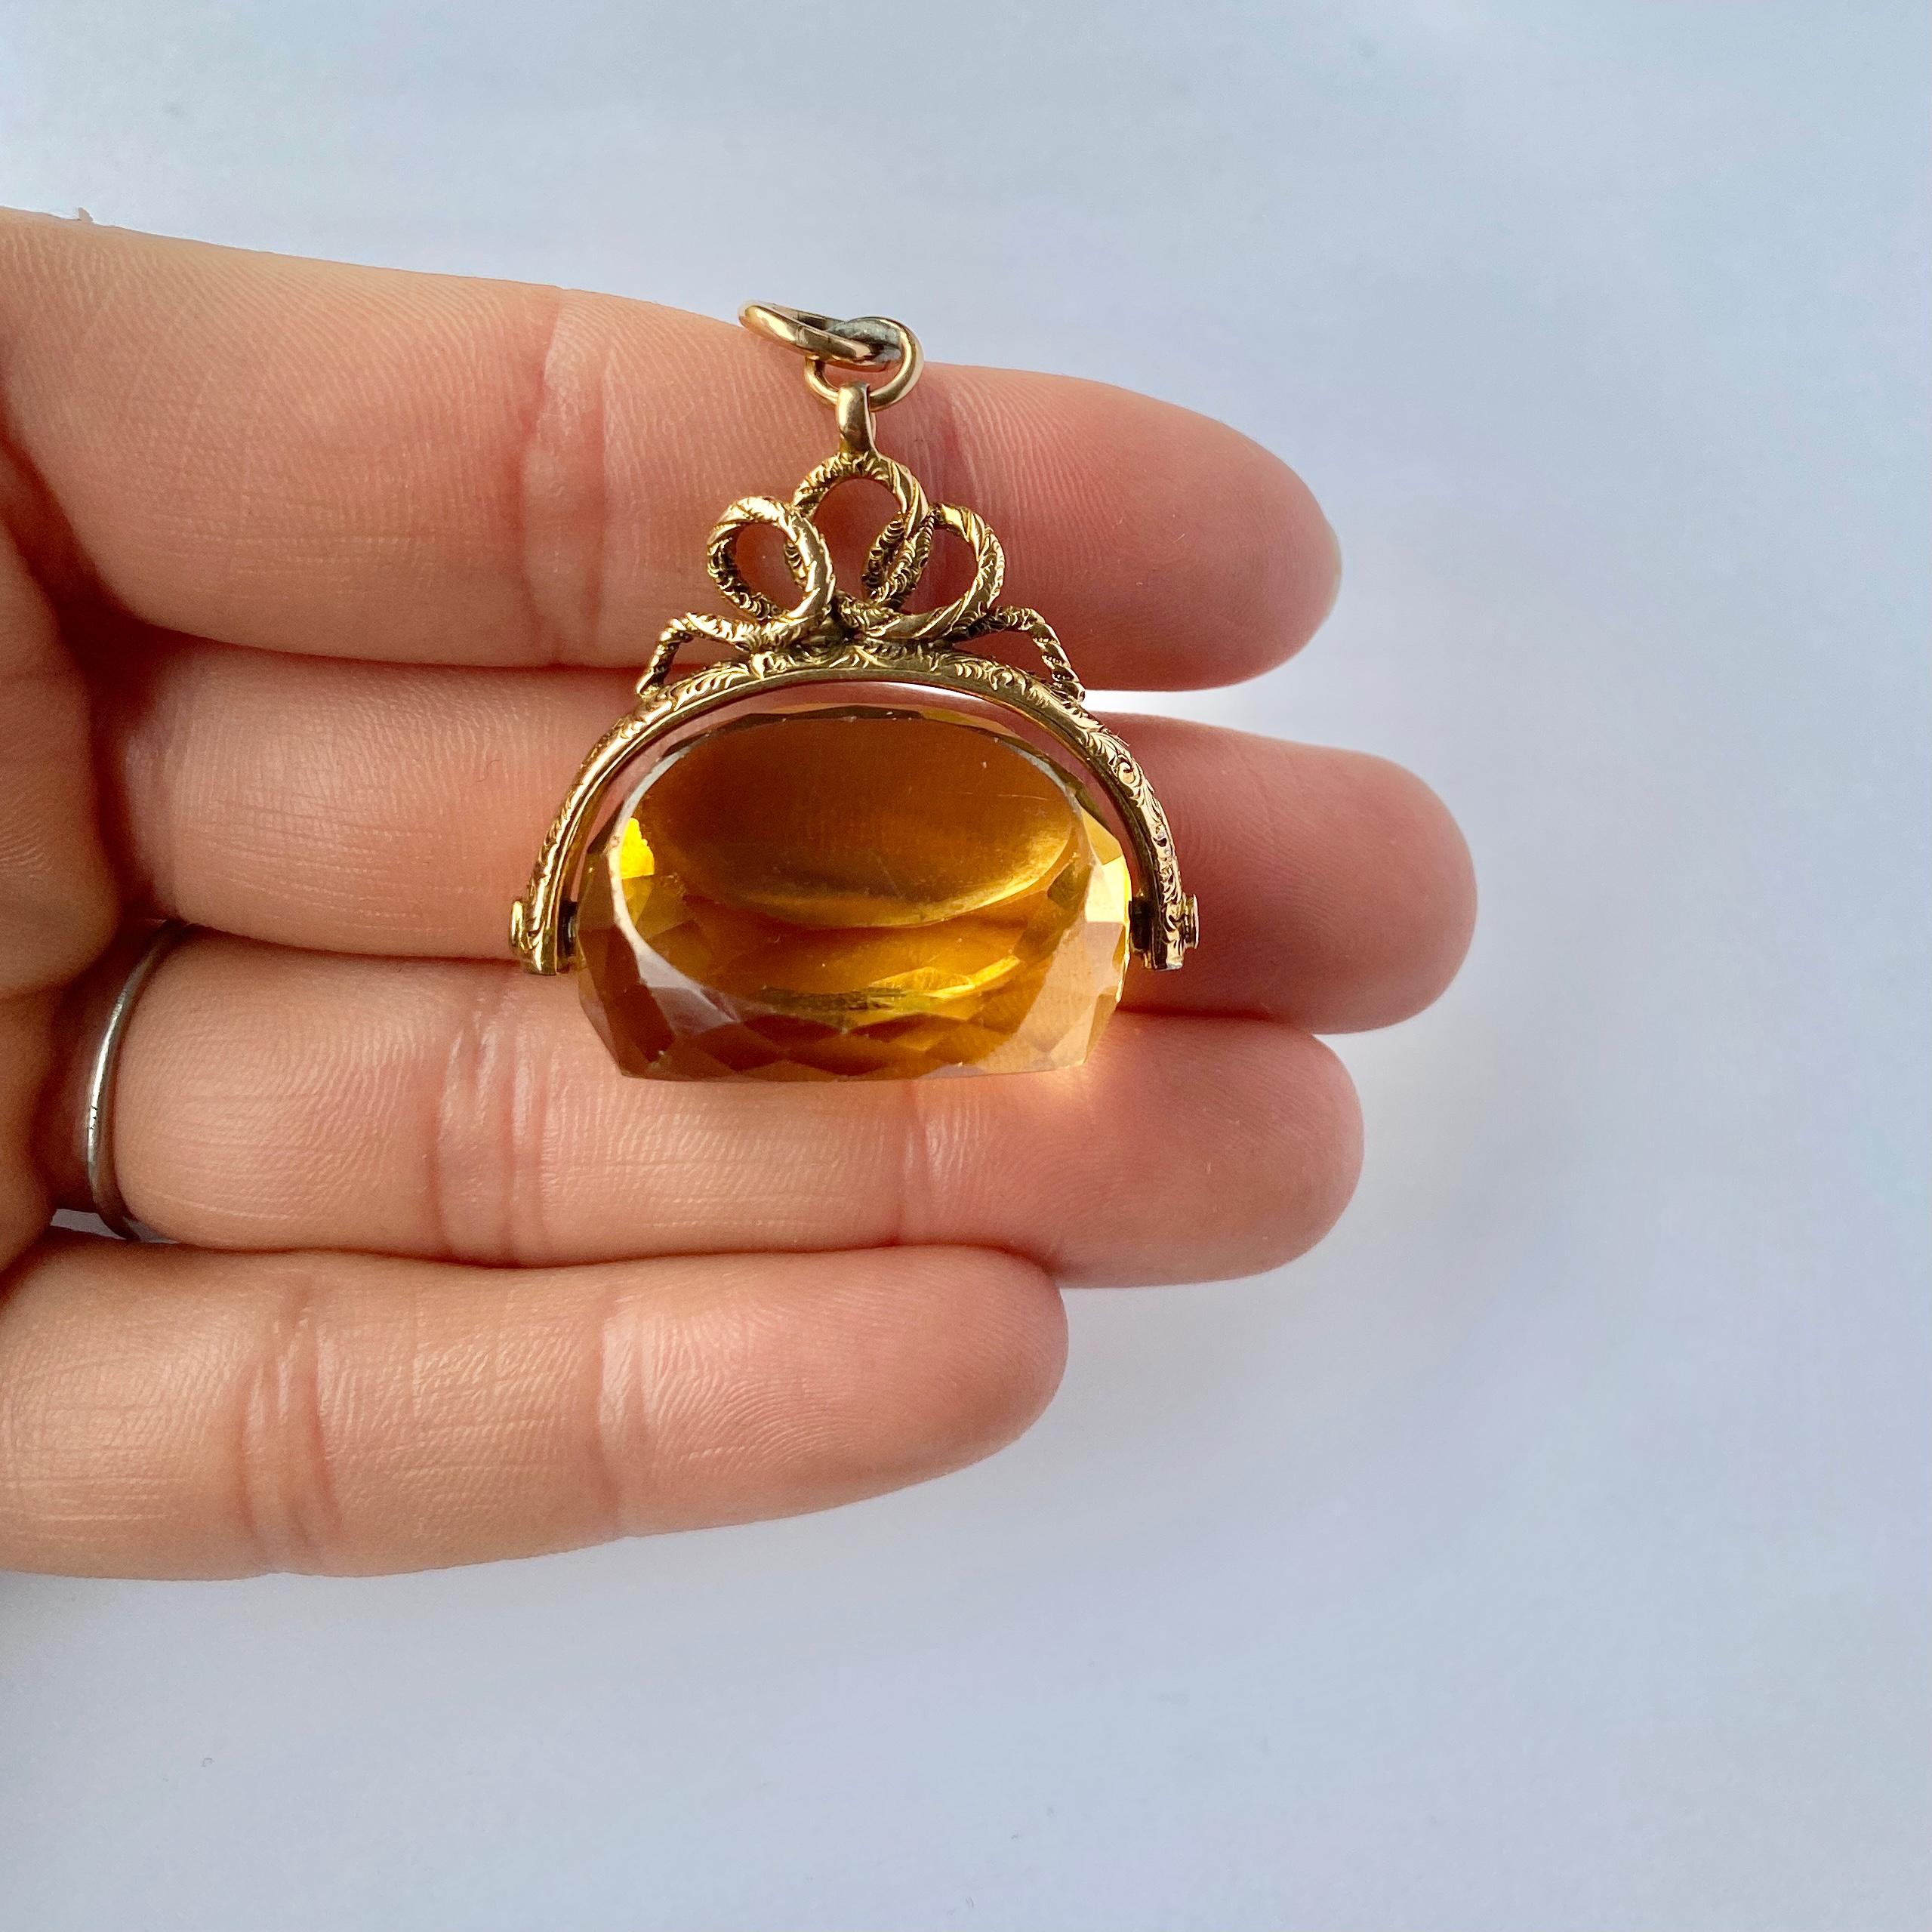 This gorgeous swivel fob holds a yellow citrine stone and the frame and loop is modelled out of 15ct gold. The frame has a snake like feel to it and twists and turns. 

Height including Loop: 45mm

Weight: 15.2g 